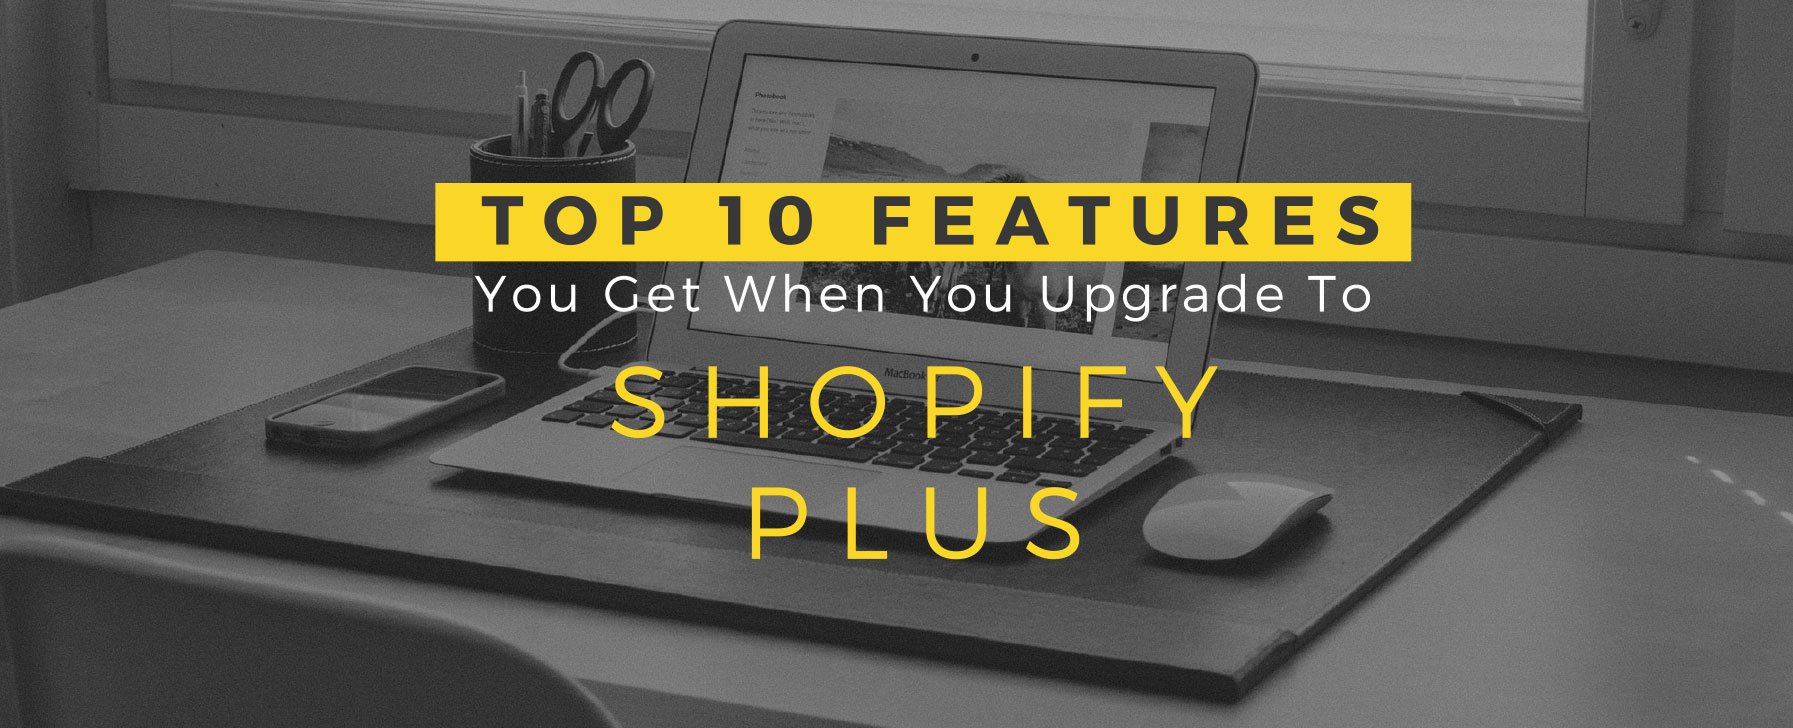 Top-10-Features-You-Get-When-You-Upgrade-To-Shopify-Plus